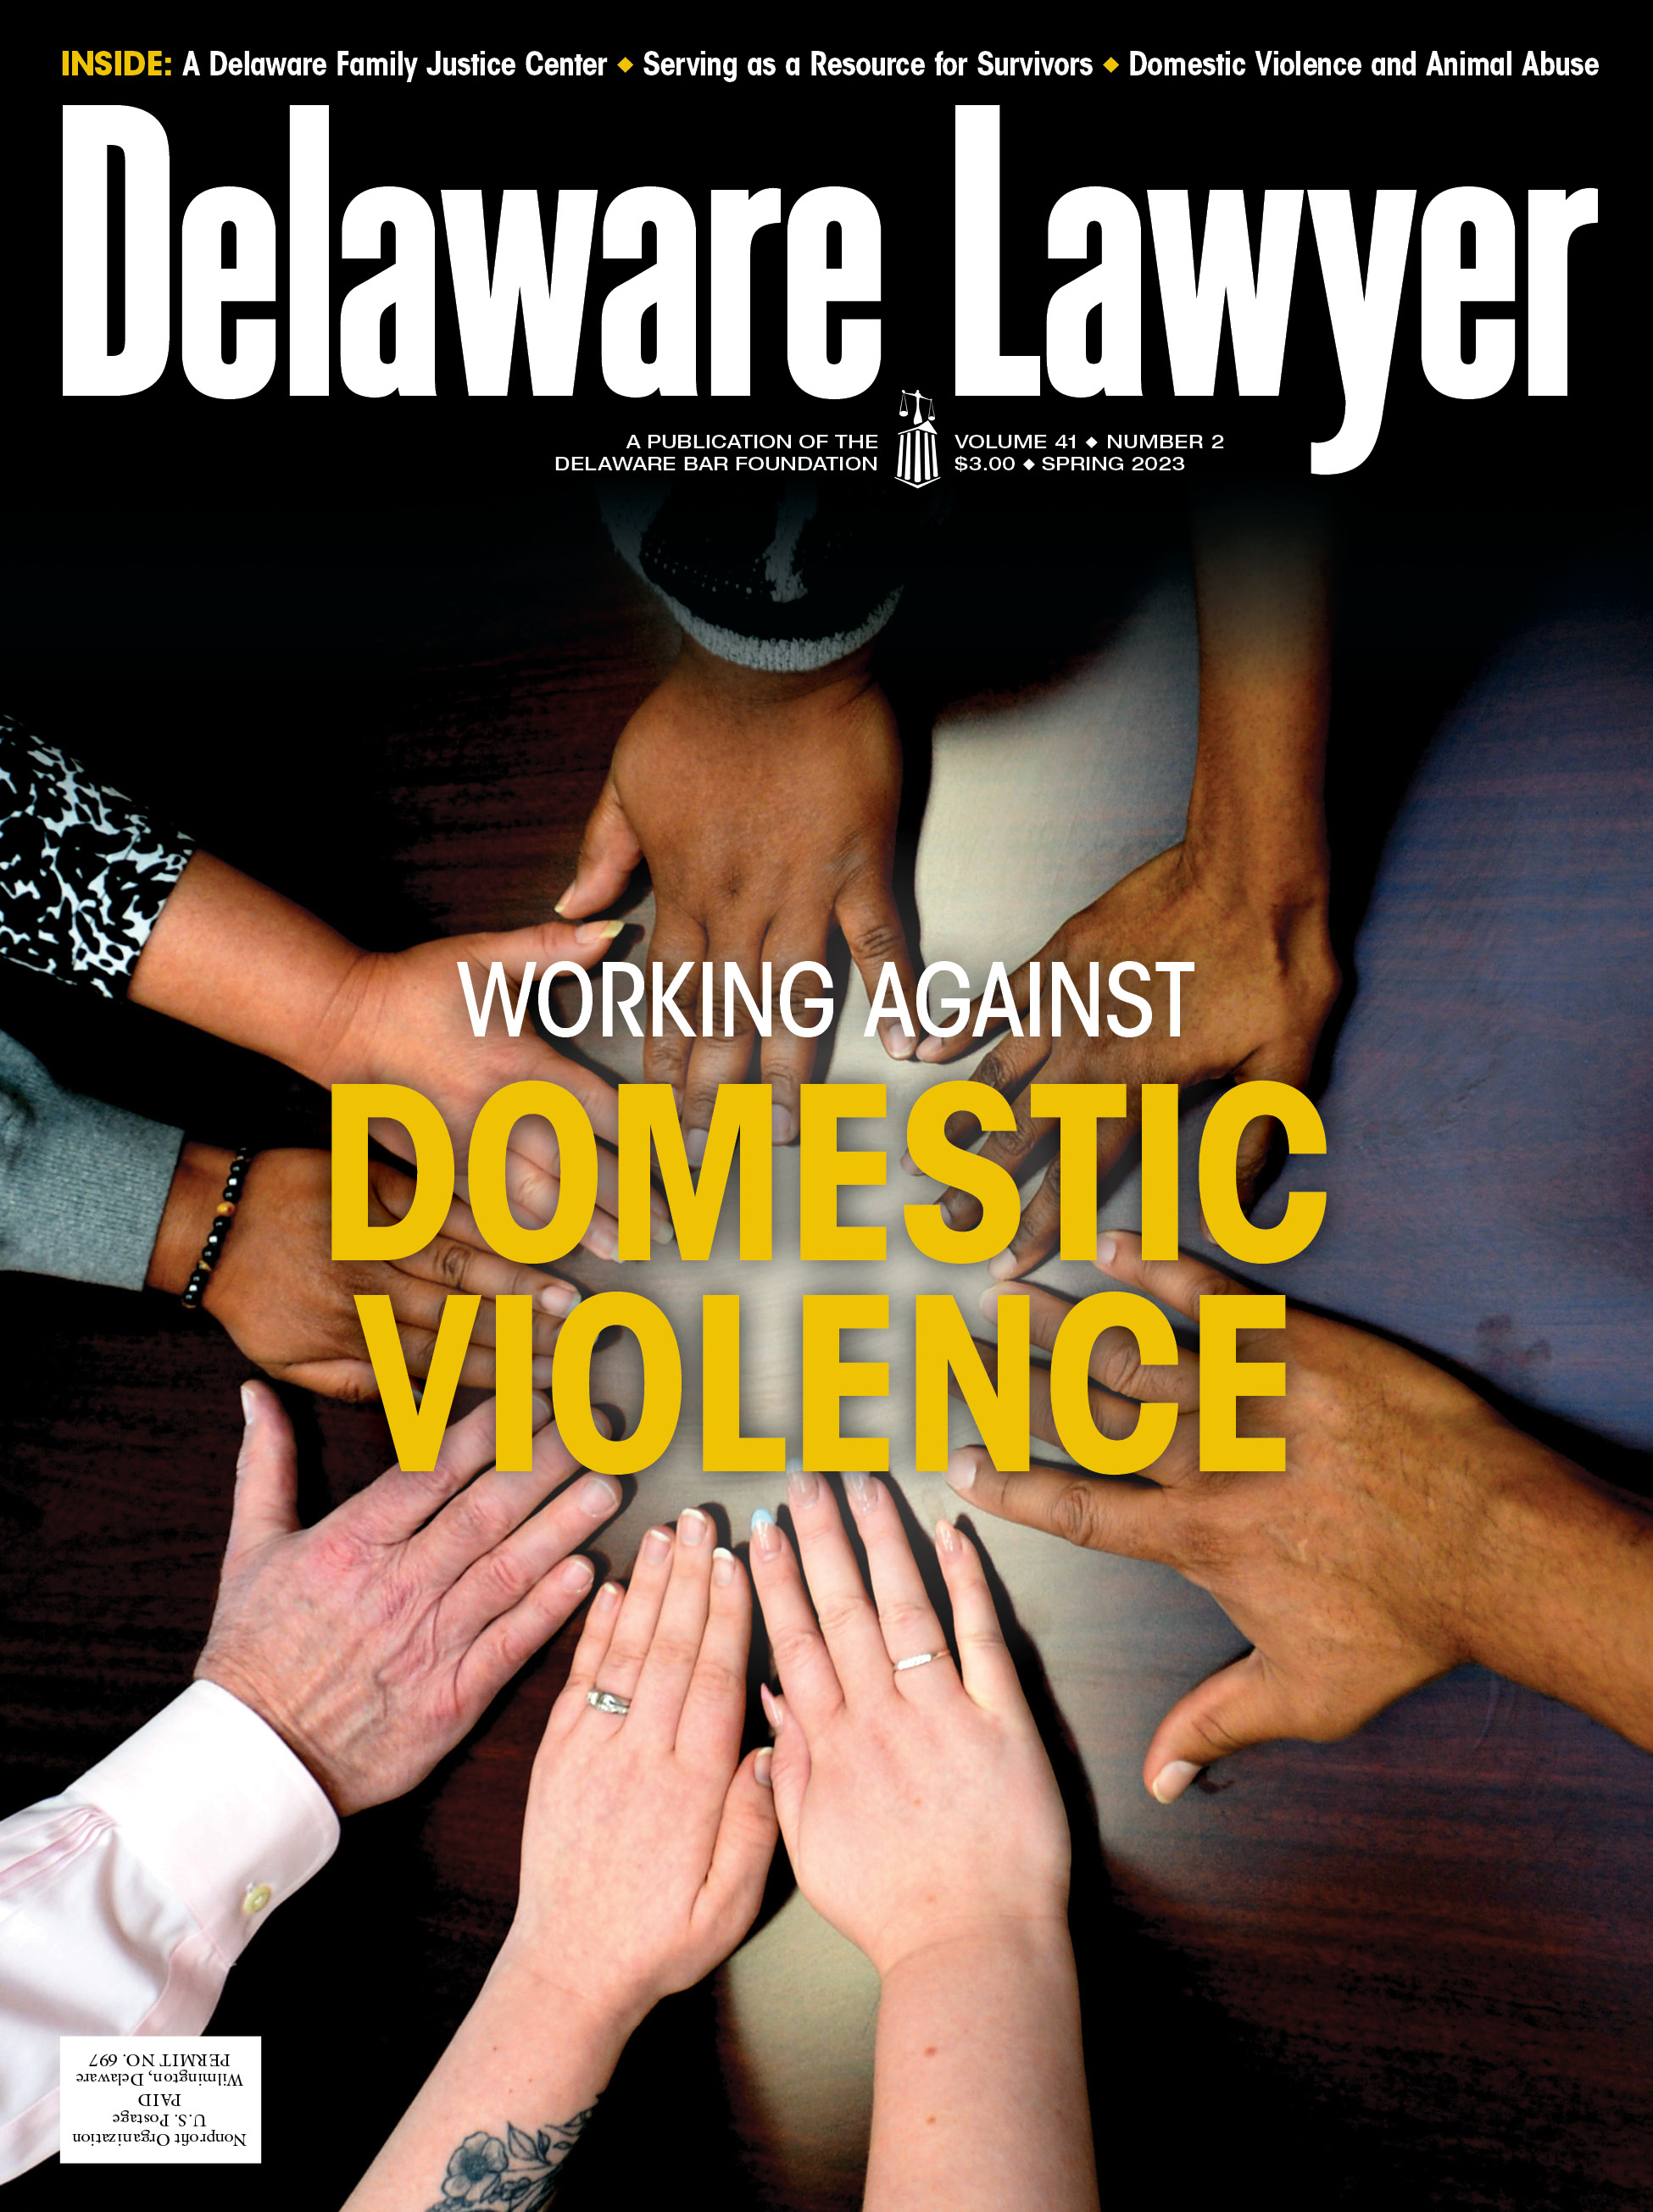 WORKING AGAINST DOMESTIC VIOLENCE